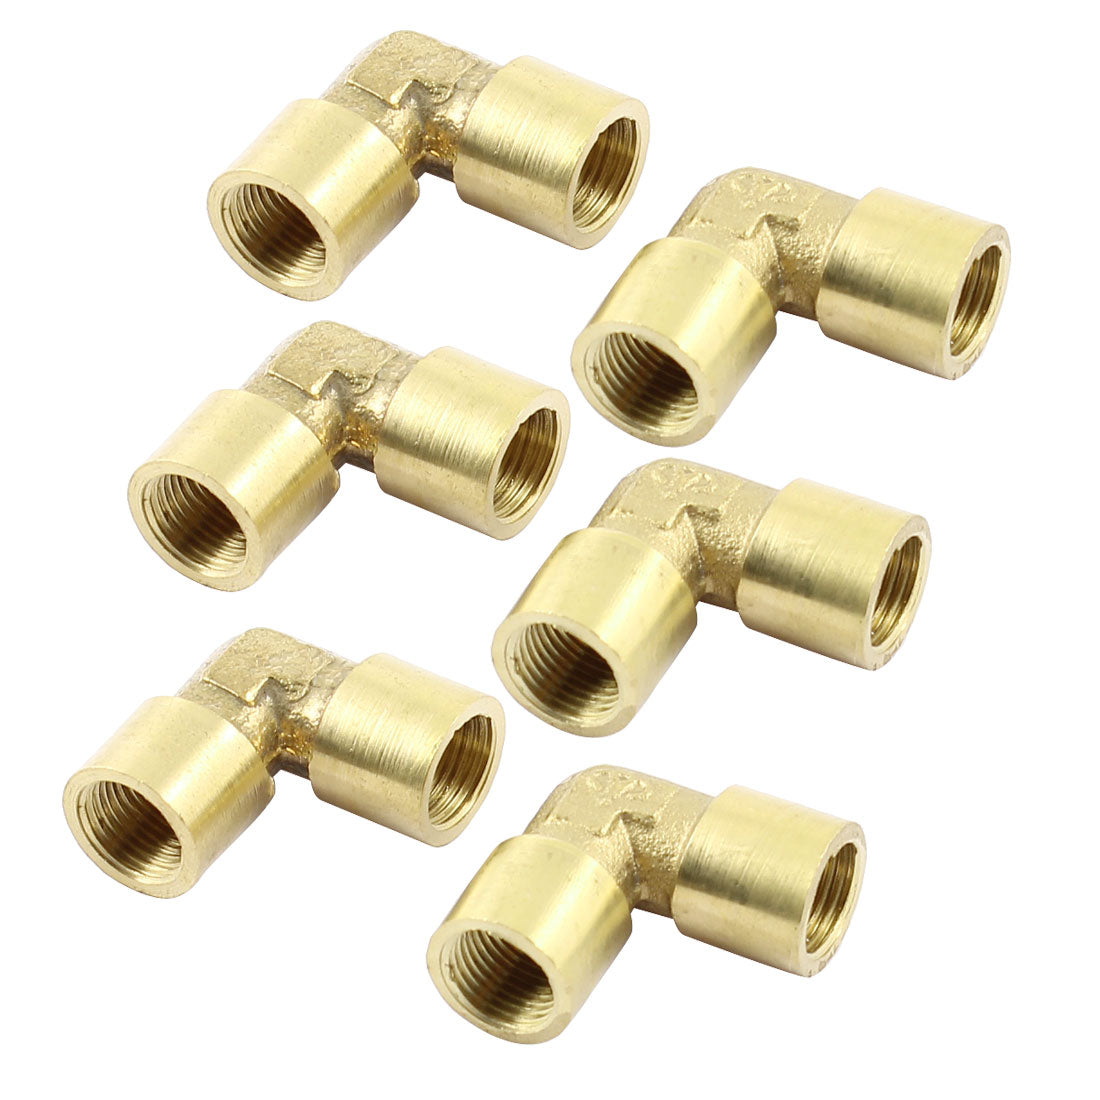 uxcell Uxcell 6pcs Right Angle Elbow 90 Degree 1/8 BSP Female Equal Pipe Joint Connector Fitting Coupling Coupler